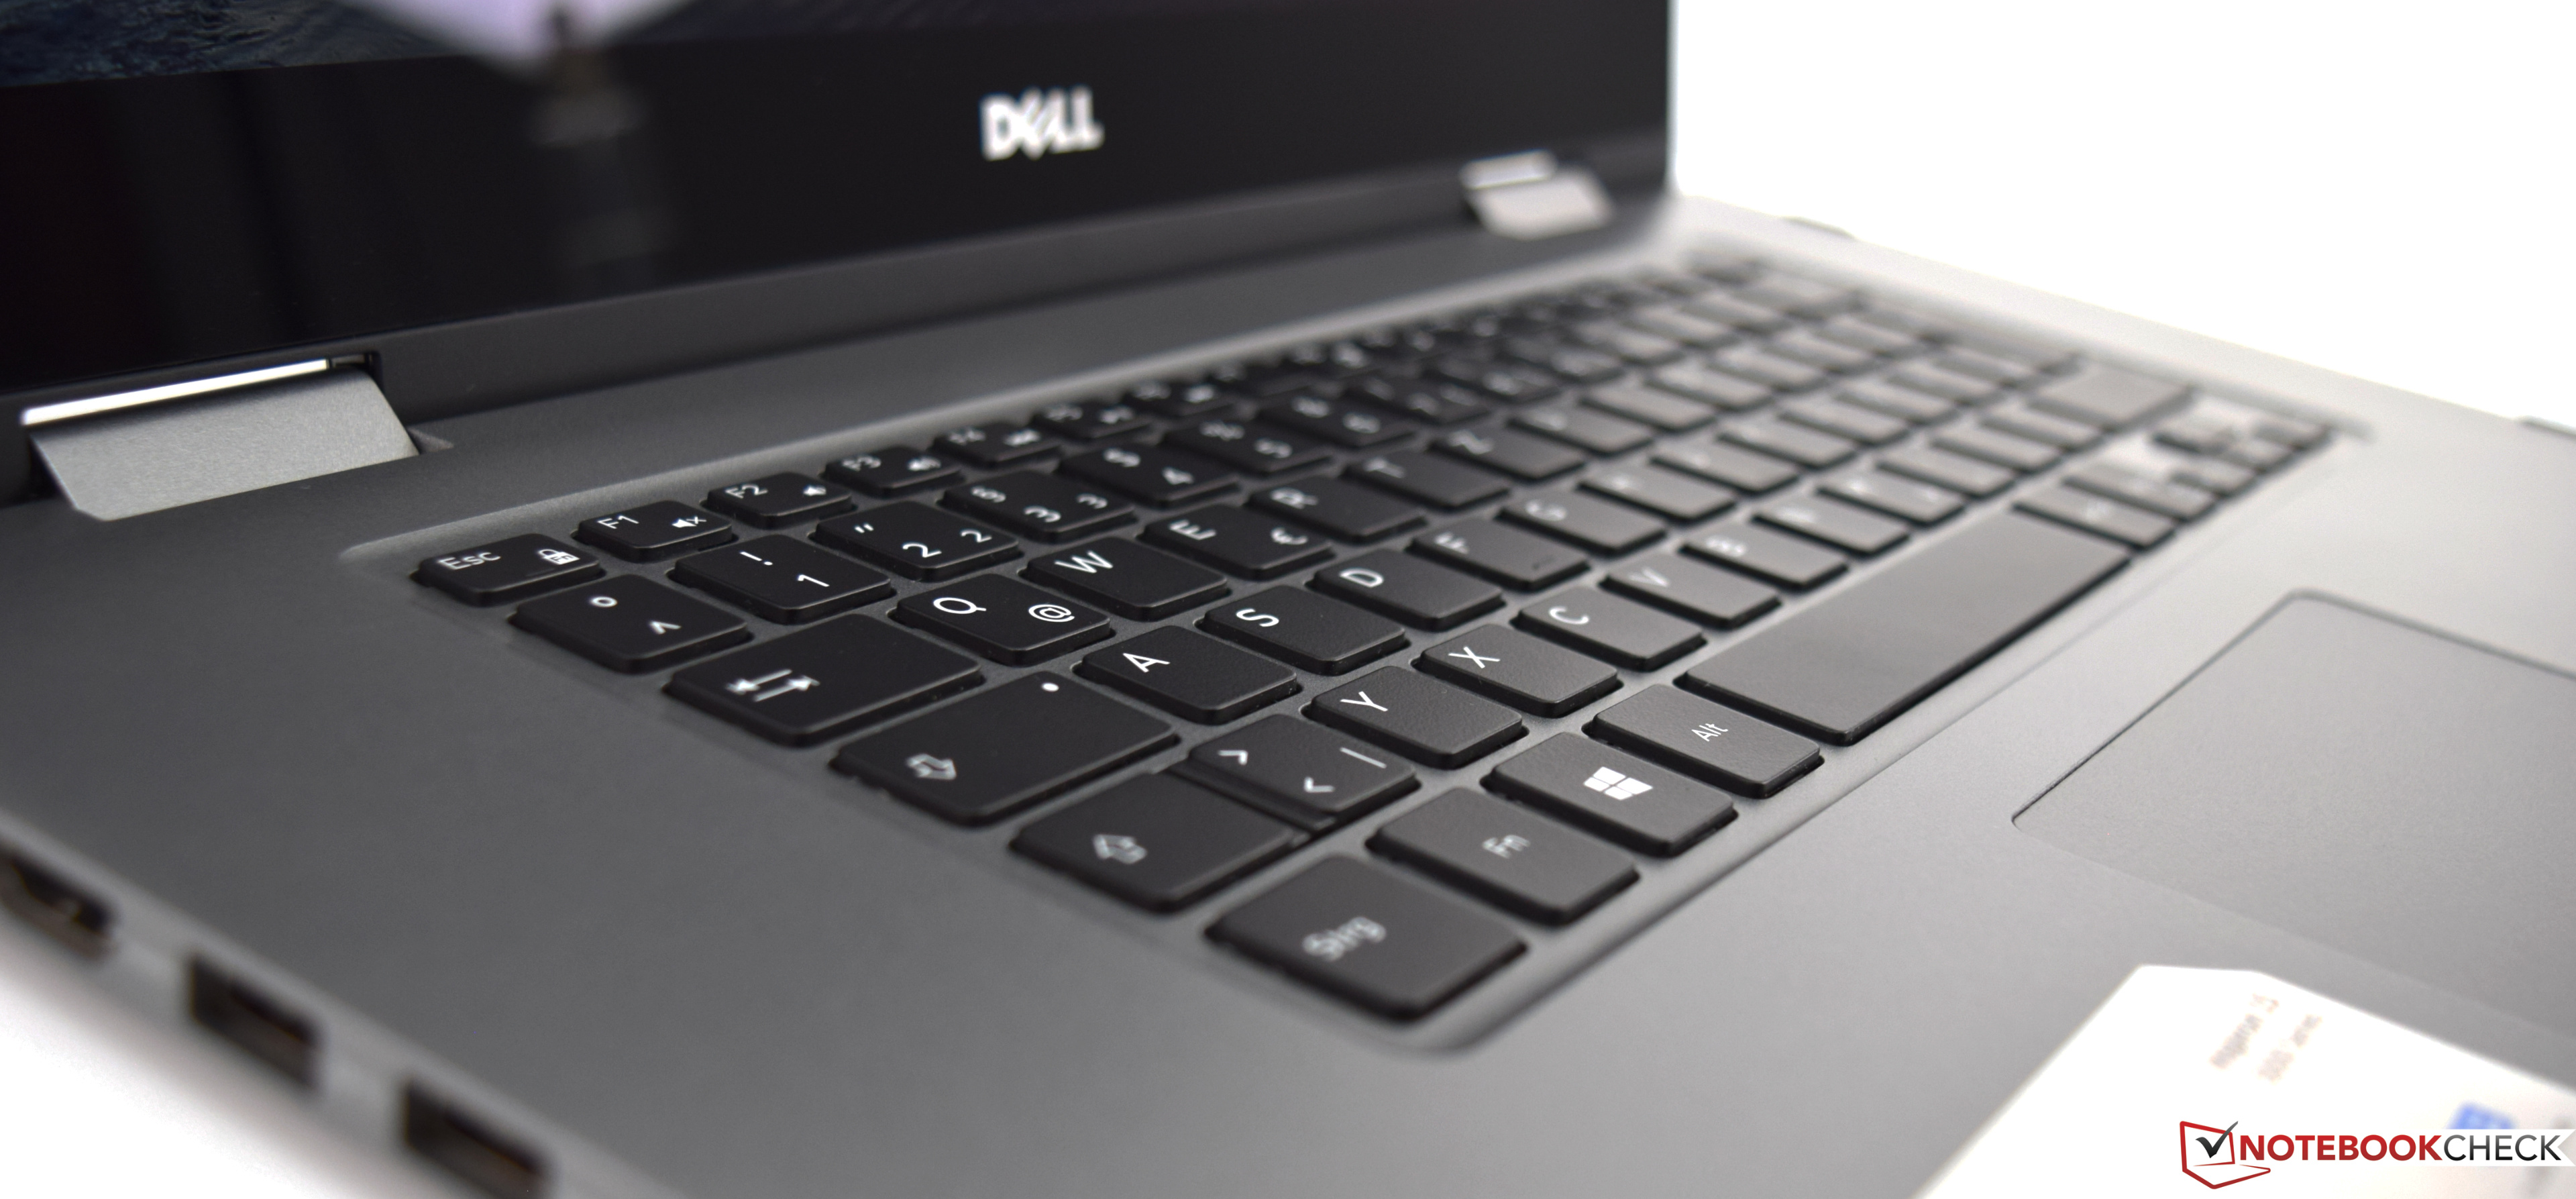 Dell Inspiron 15 5579 (i5-8250U, SSD, IPS, Touch) Convertible Review